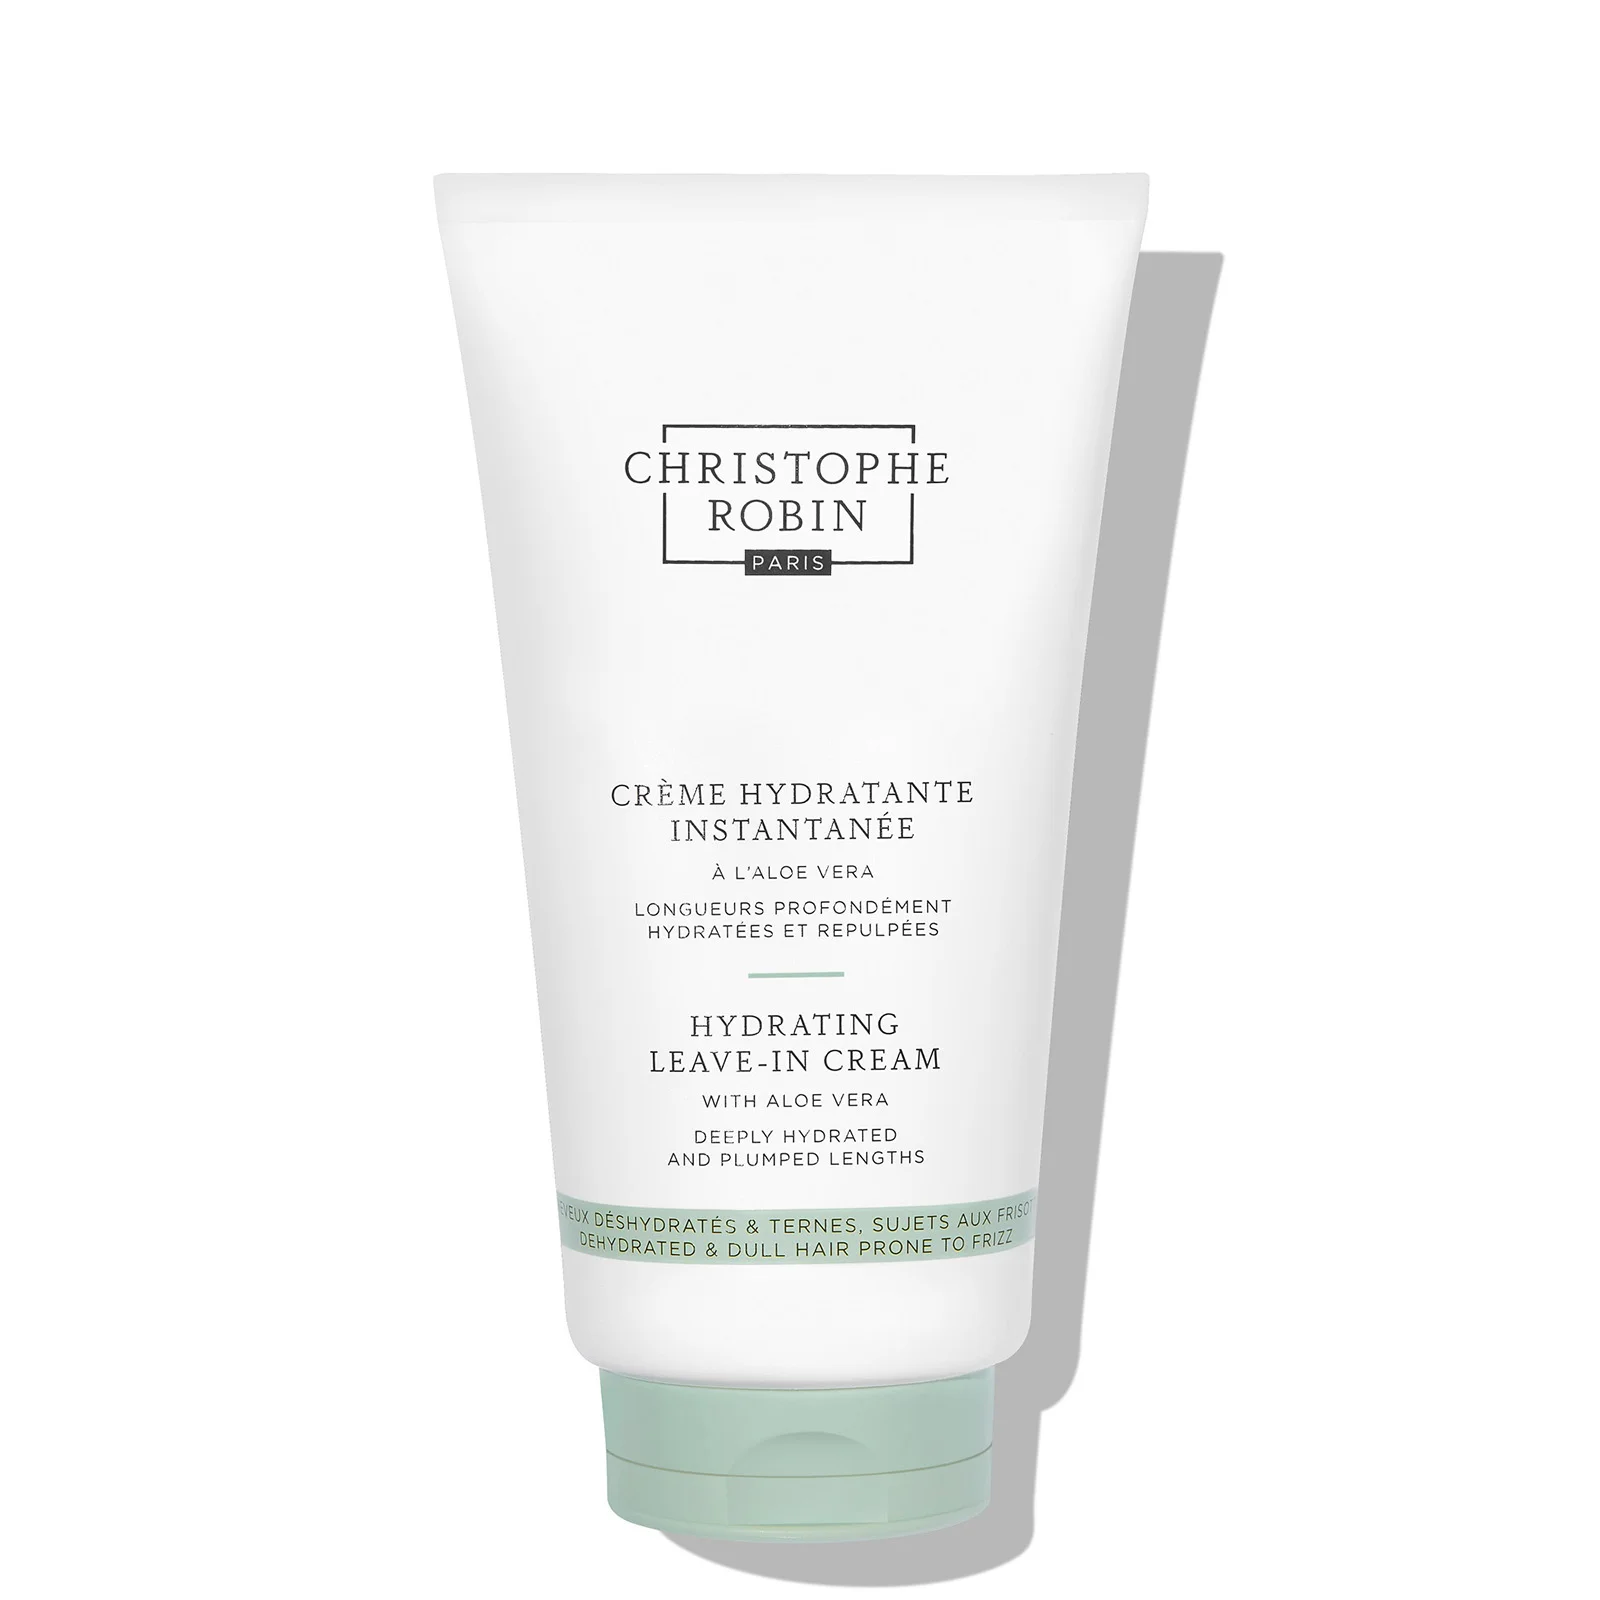 Christophe Robin Hydrating Leave-In Cream 150ml Image 1